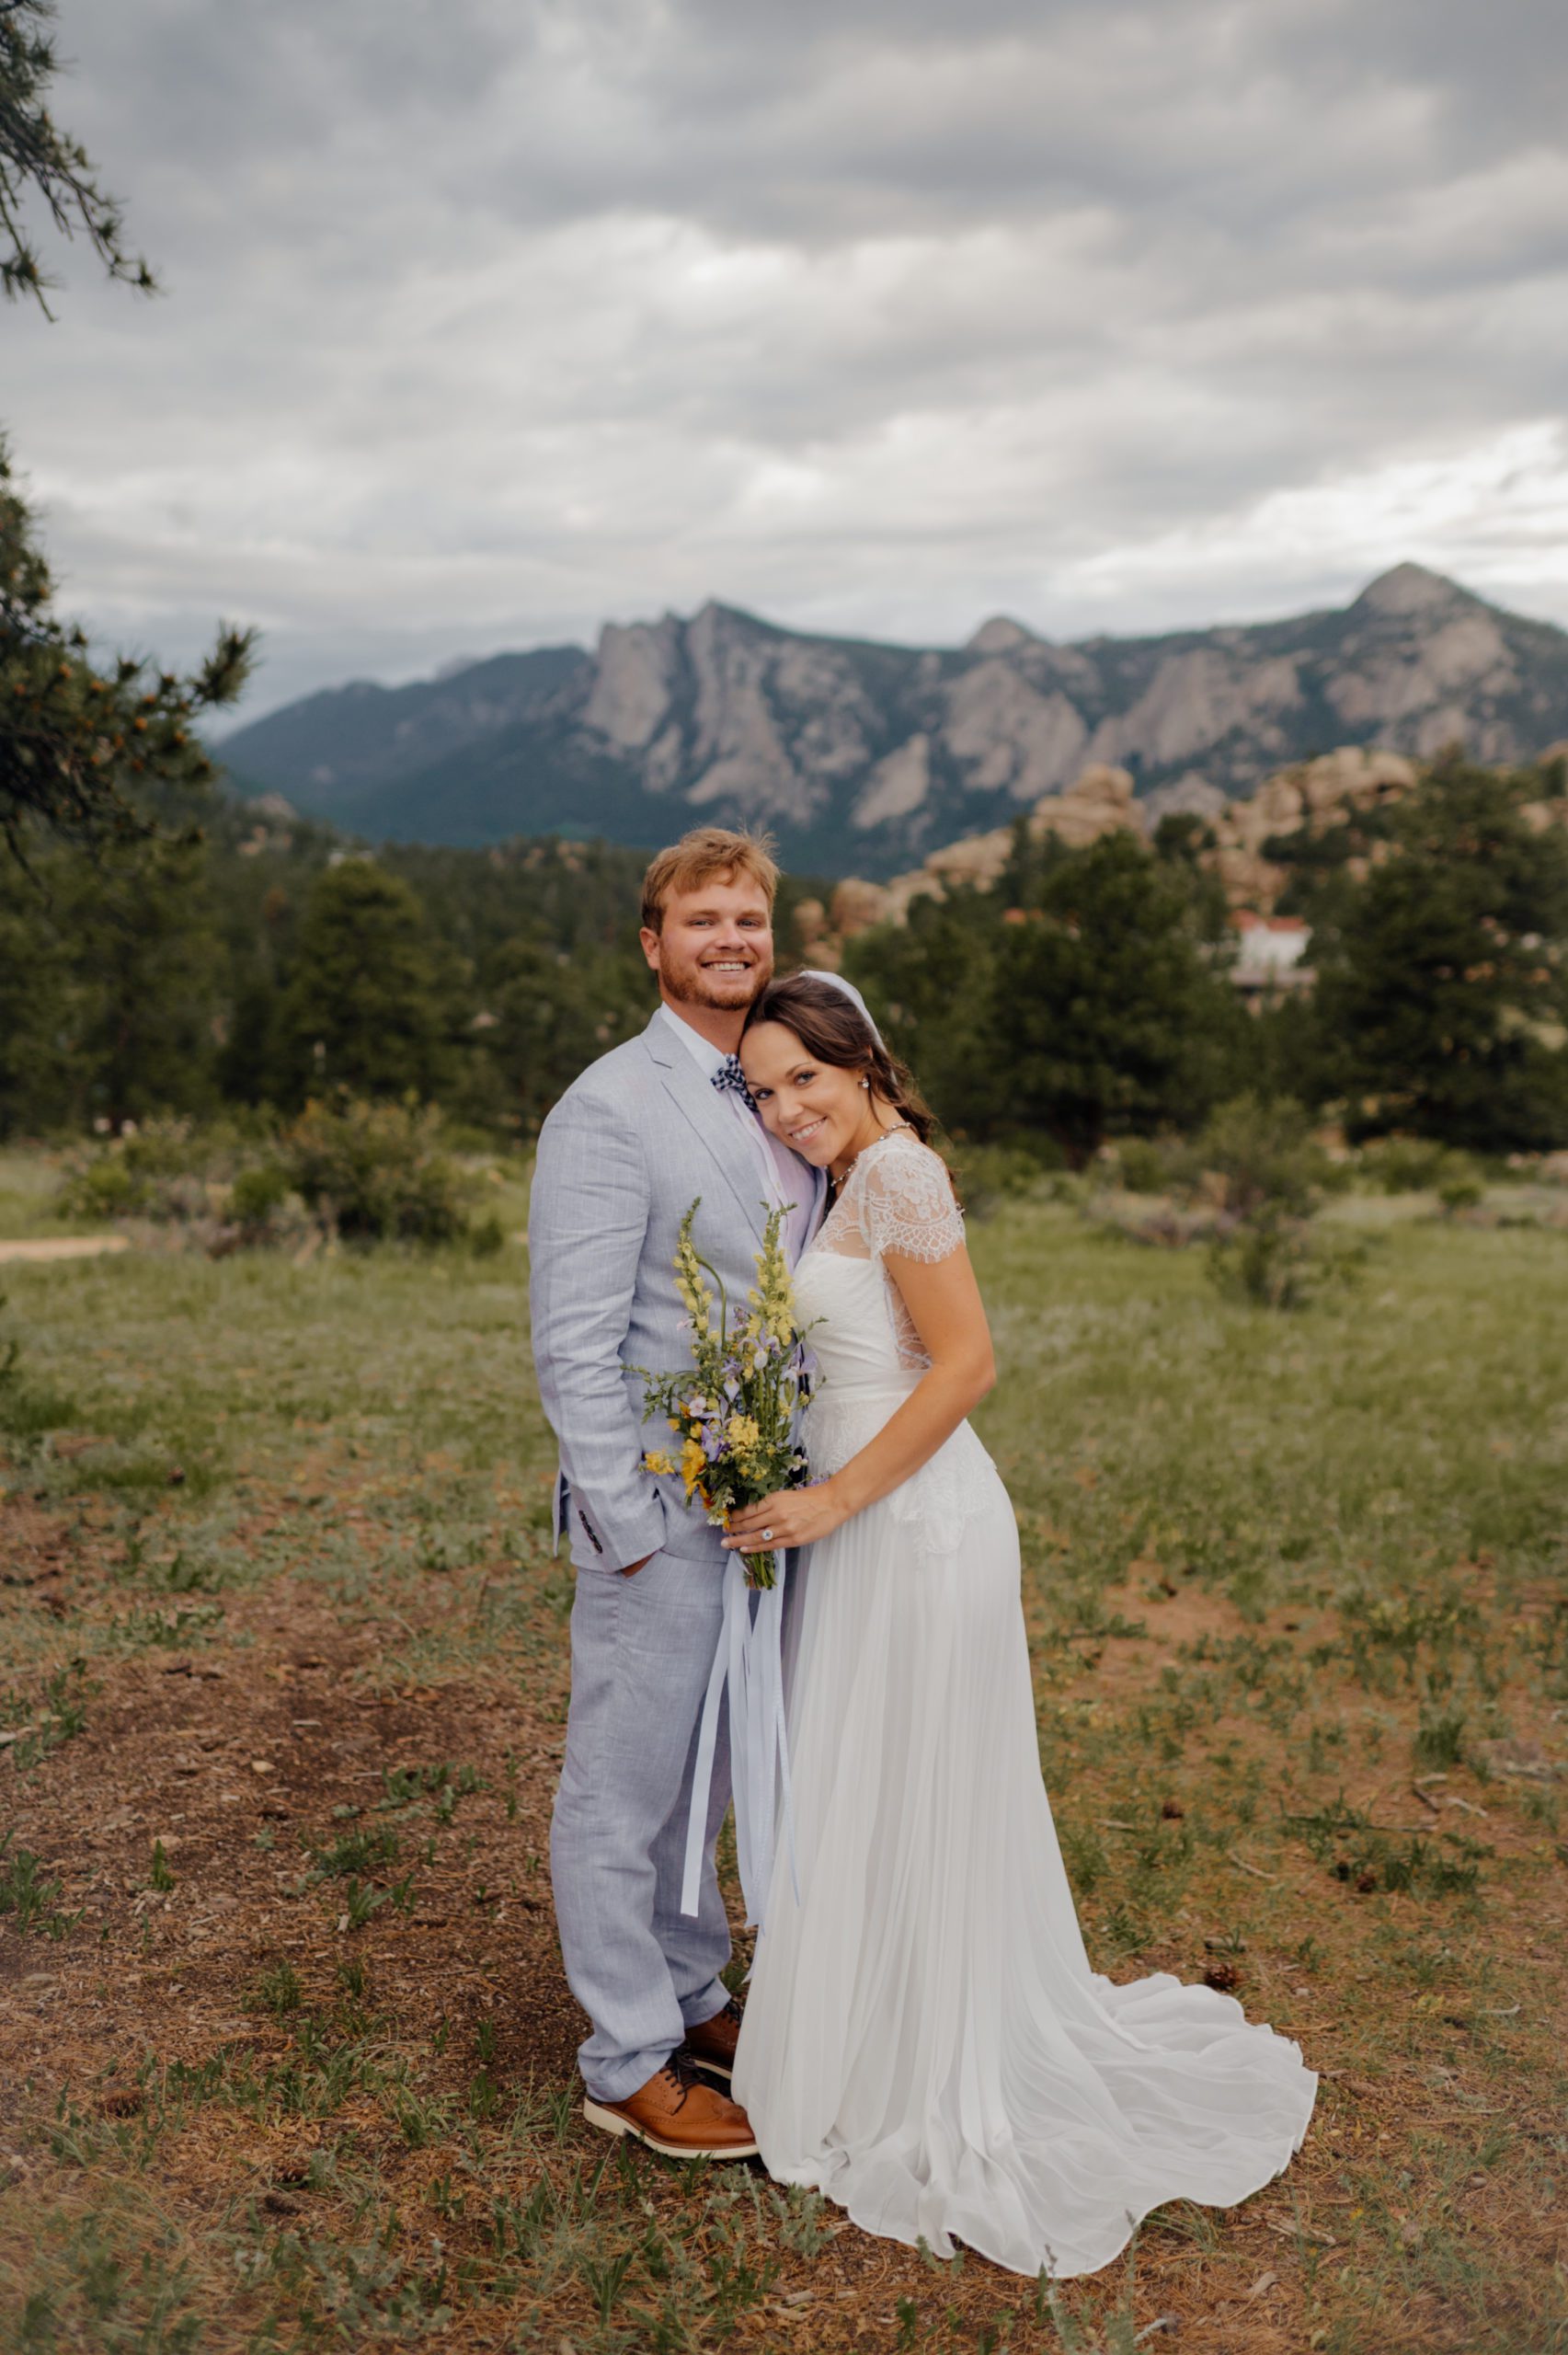 The bride and groom smile sweetly after their elopement at Knoll Willows in Estes Park.